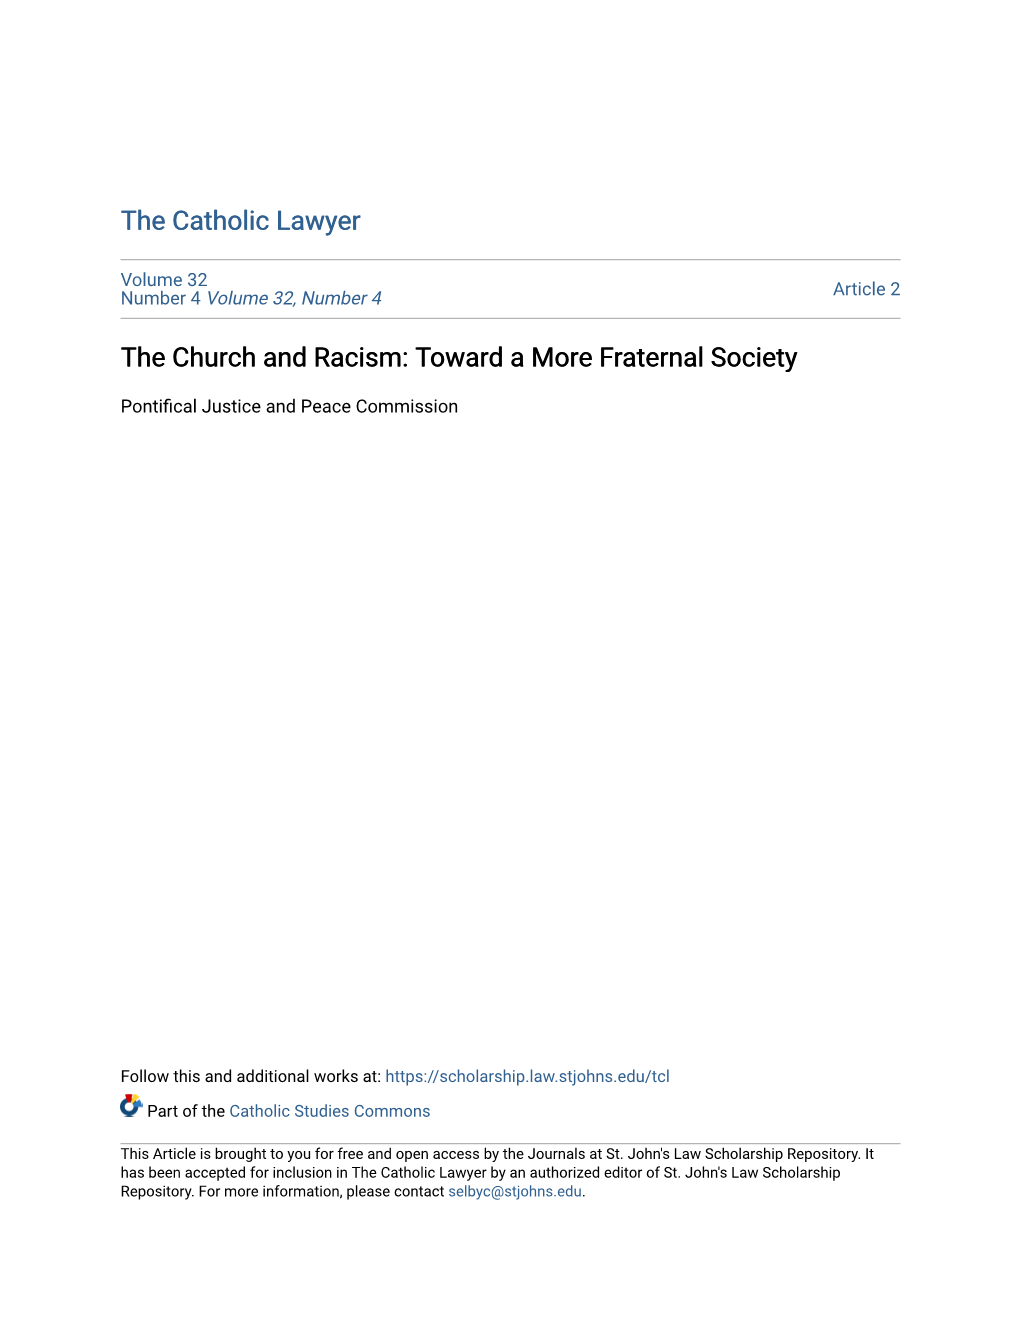 The Church and Racism: Toward a More Fraternal Society